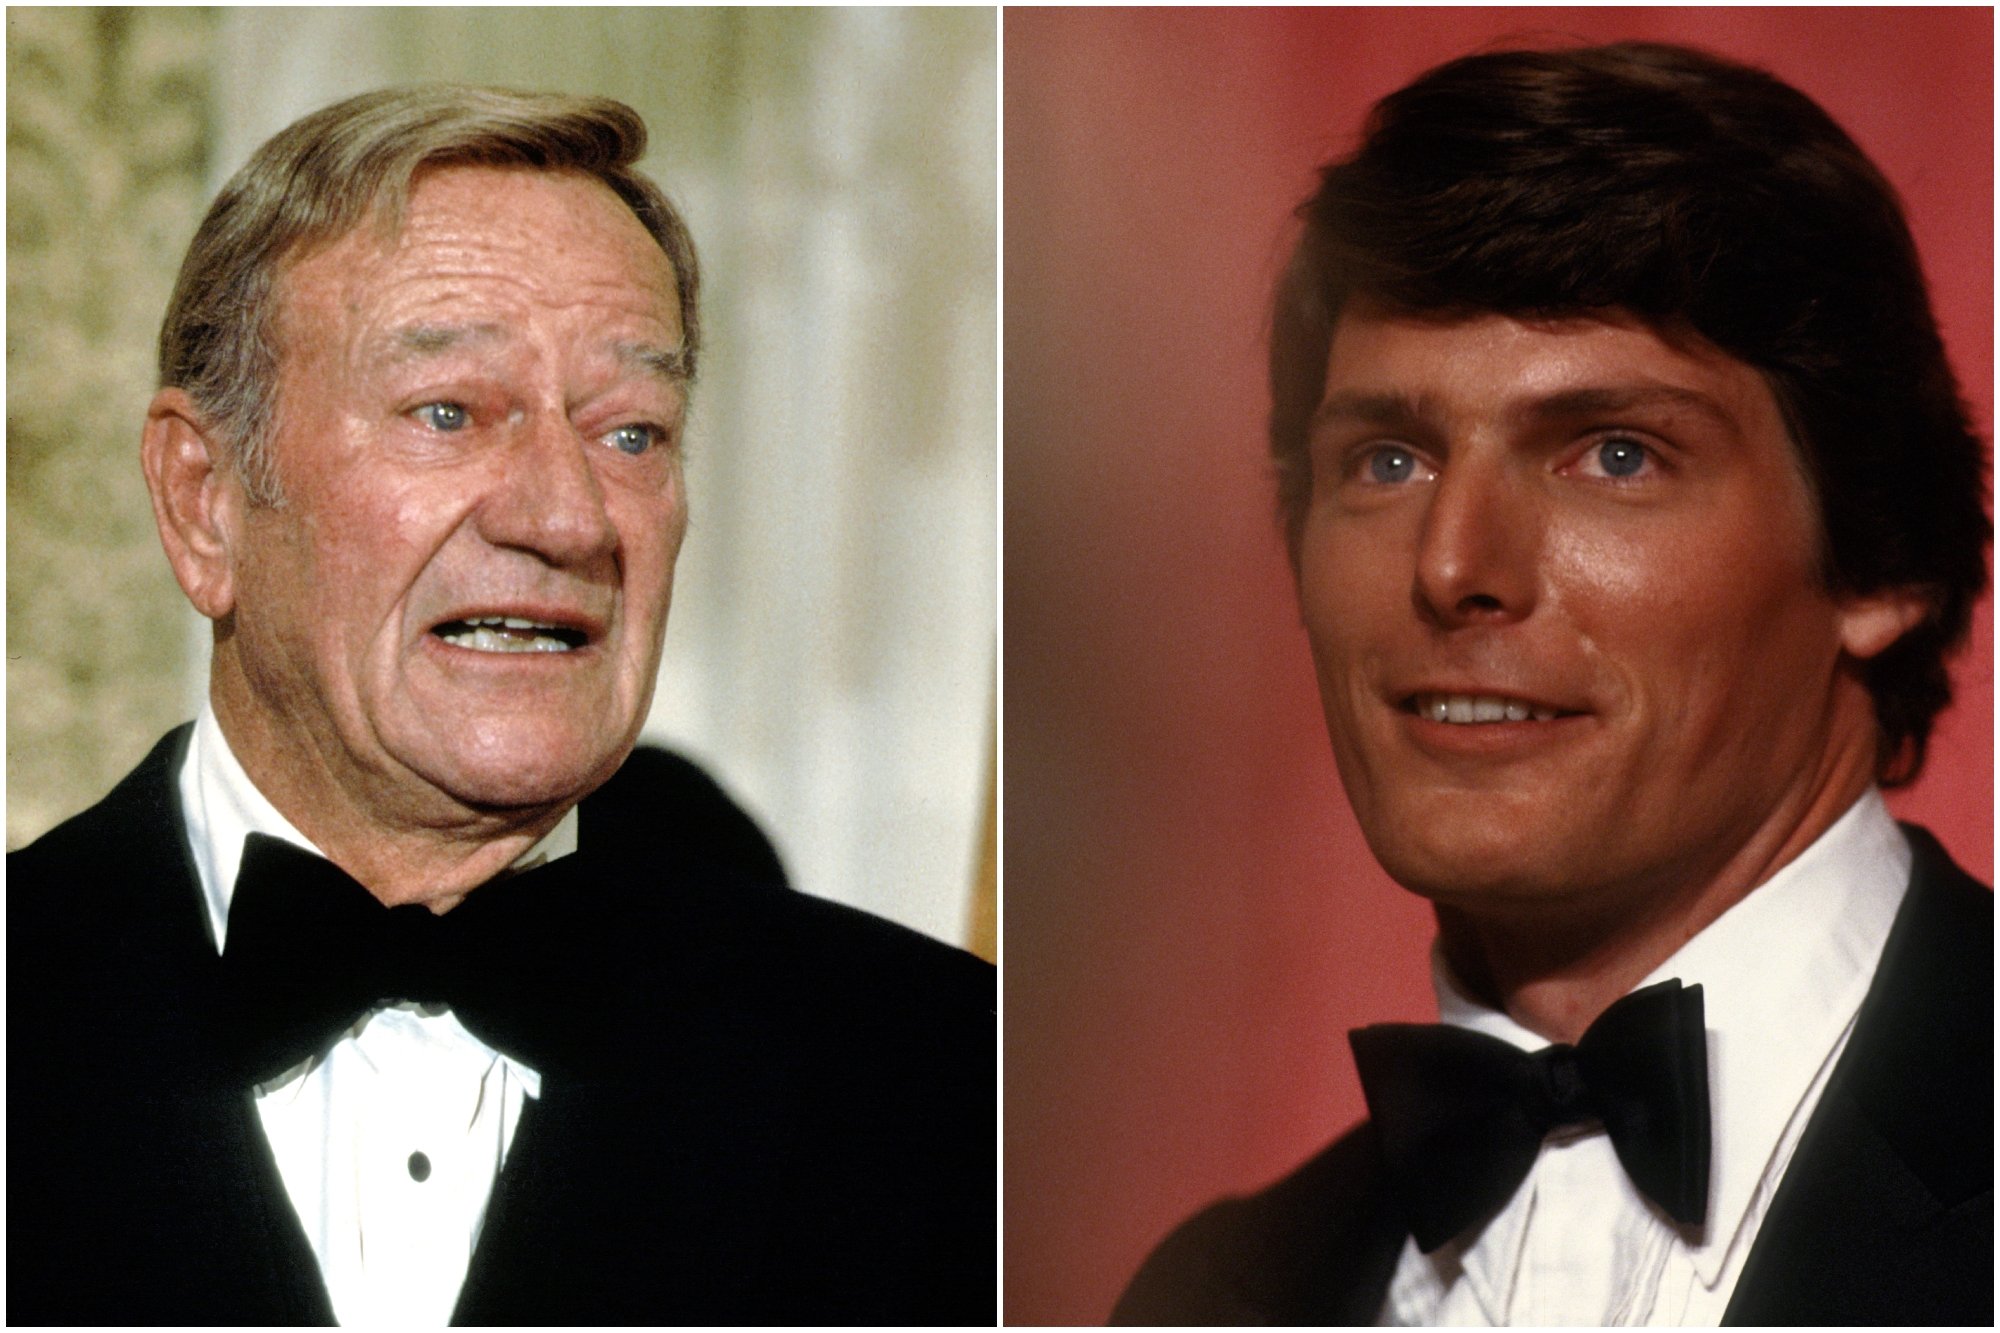 John Wayne and Christopher Reeve. Wayne looks shocked, wearing a tux. Reeve is smiling wearing a tux.